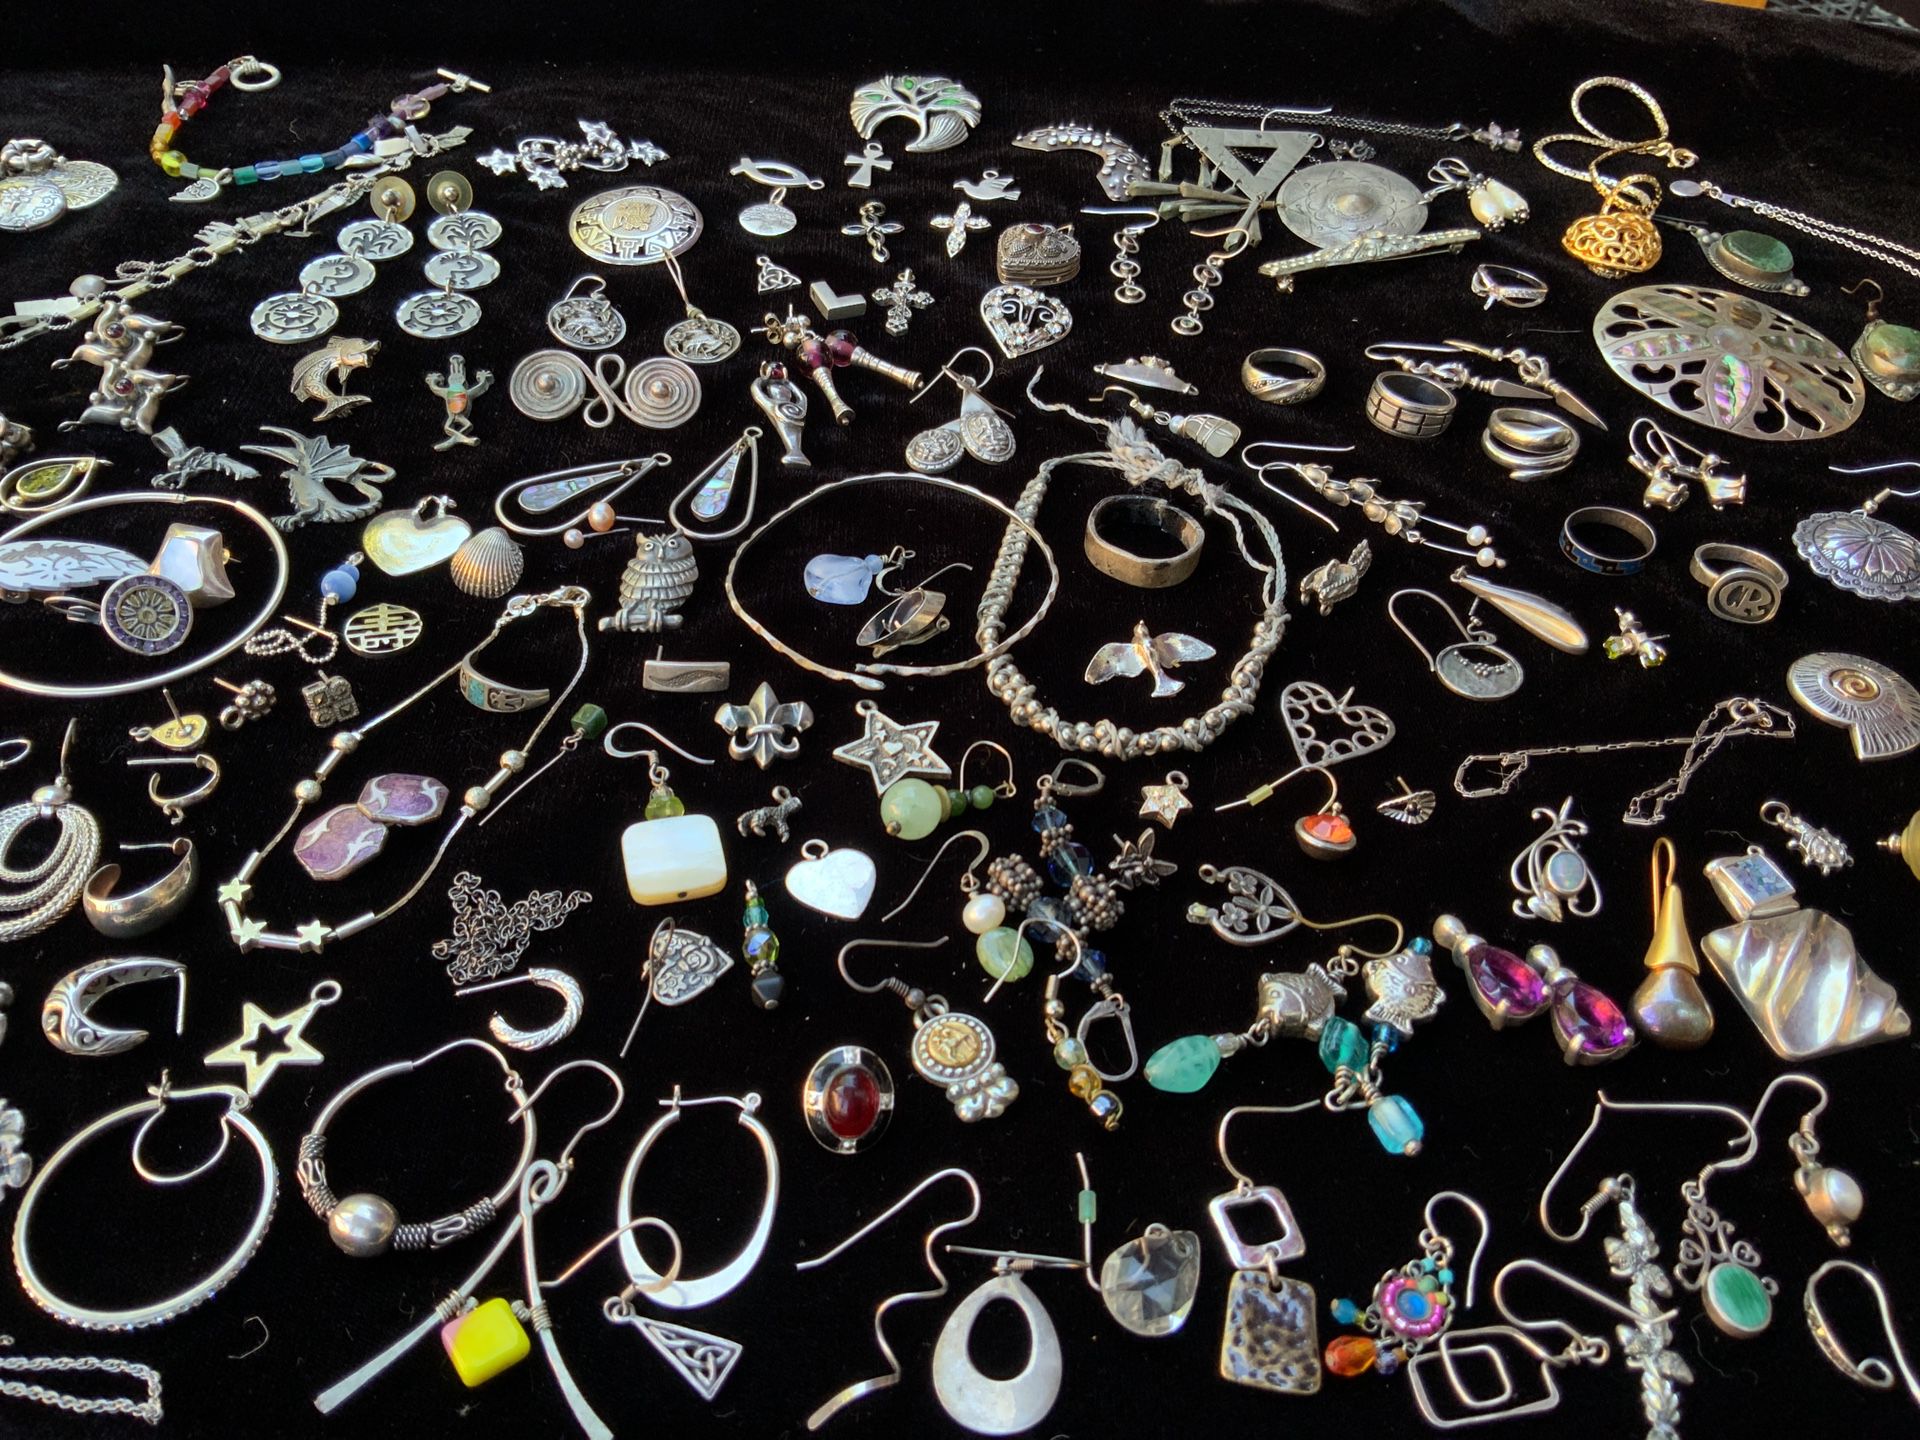 Huge 3.68lbs Lot of 925 Sterling Silver Scrap and Wearable Metal for Jewelry, Melt, Resale